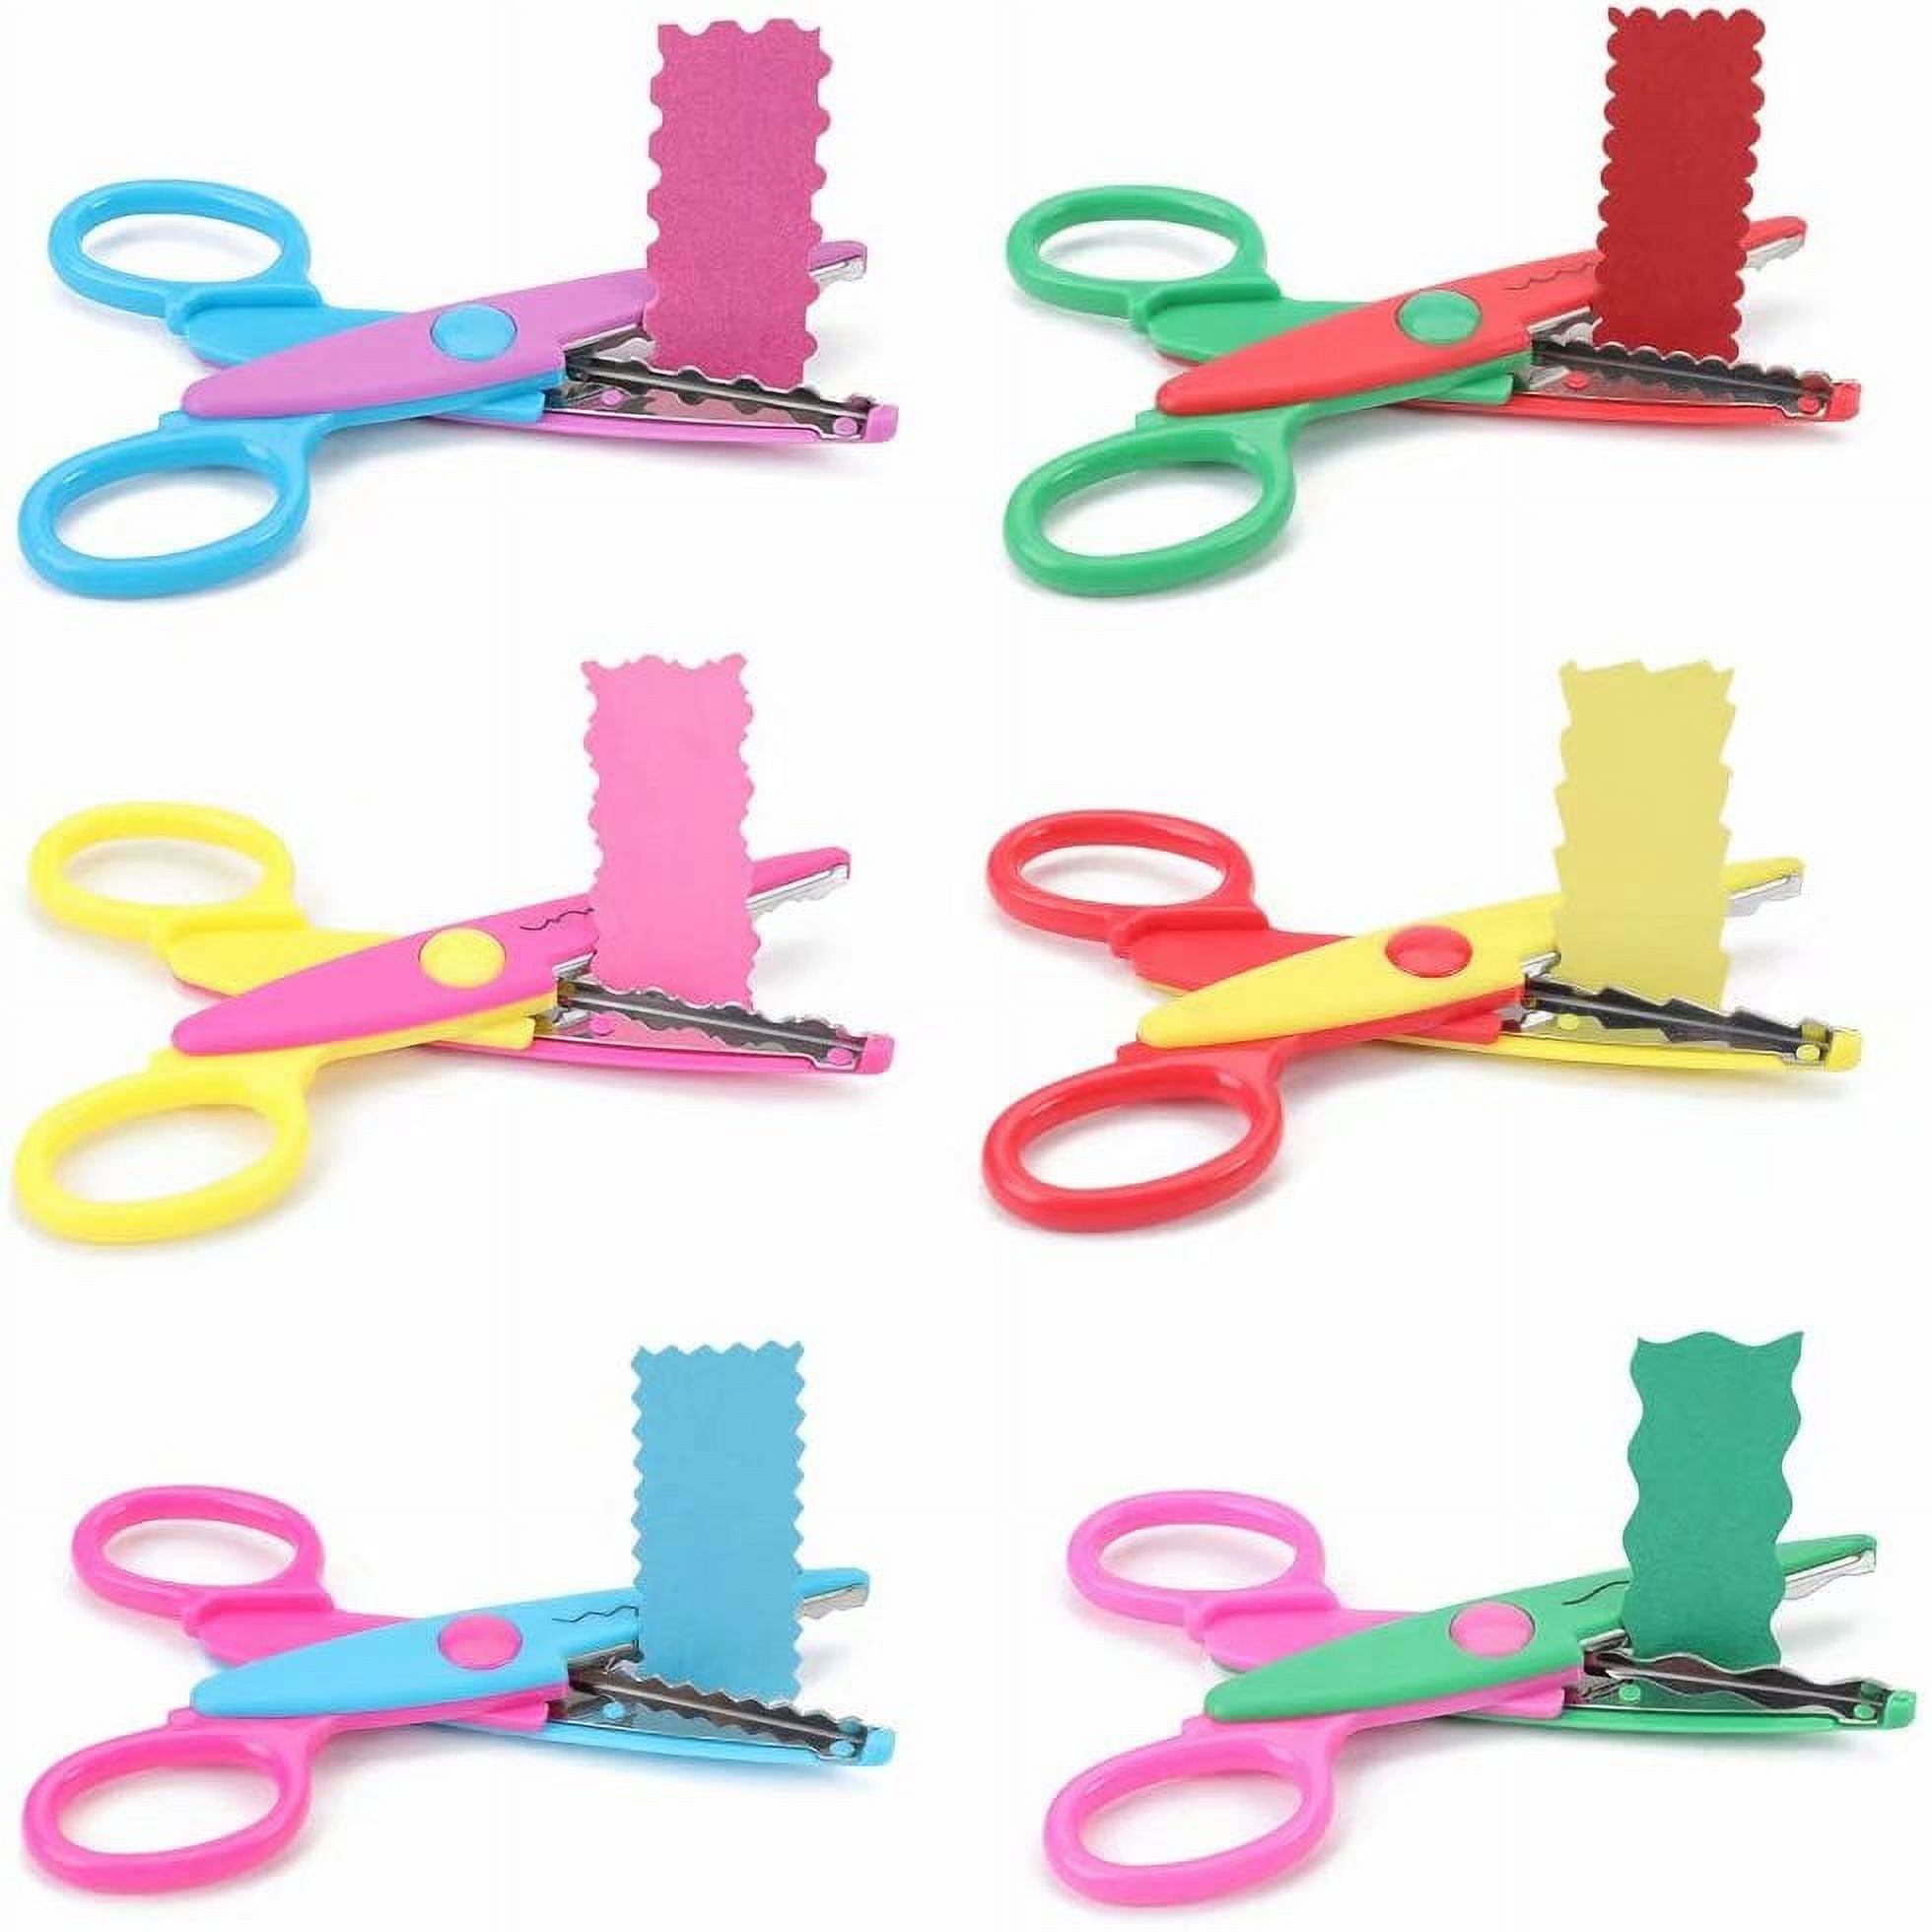 Blue Cute Safety Scissors With Protective Cover Kids Paper Craft Scissors  Card Photo Handmade Tools DIY School Office Supplies - AliExpress